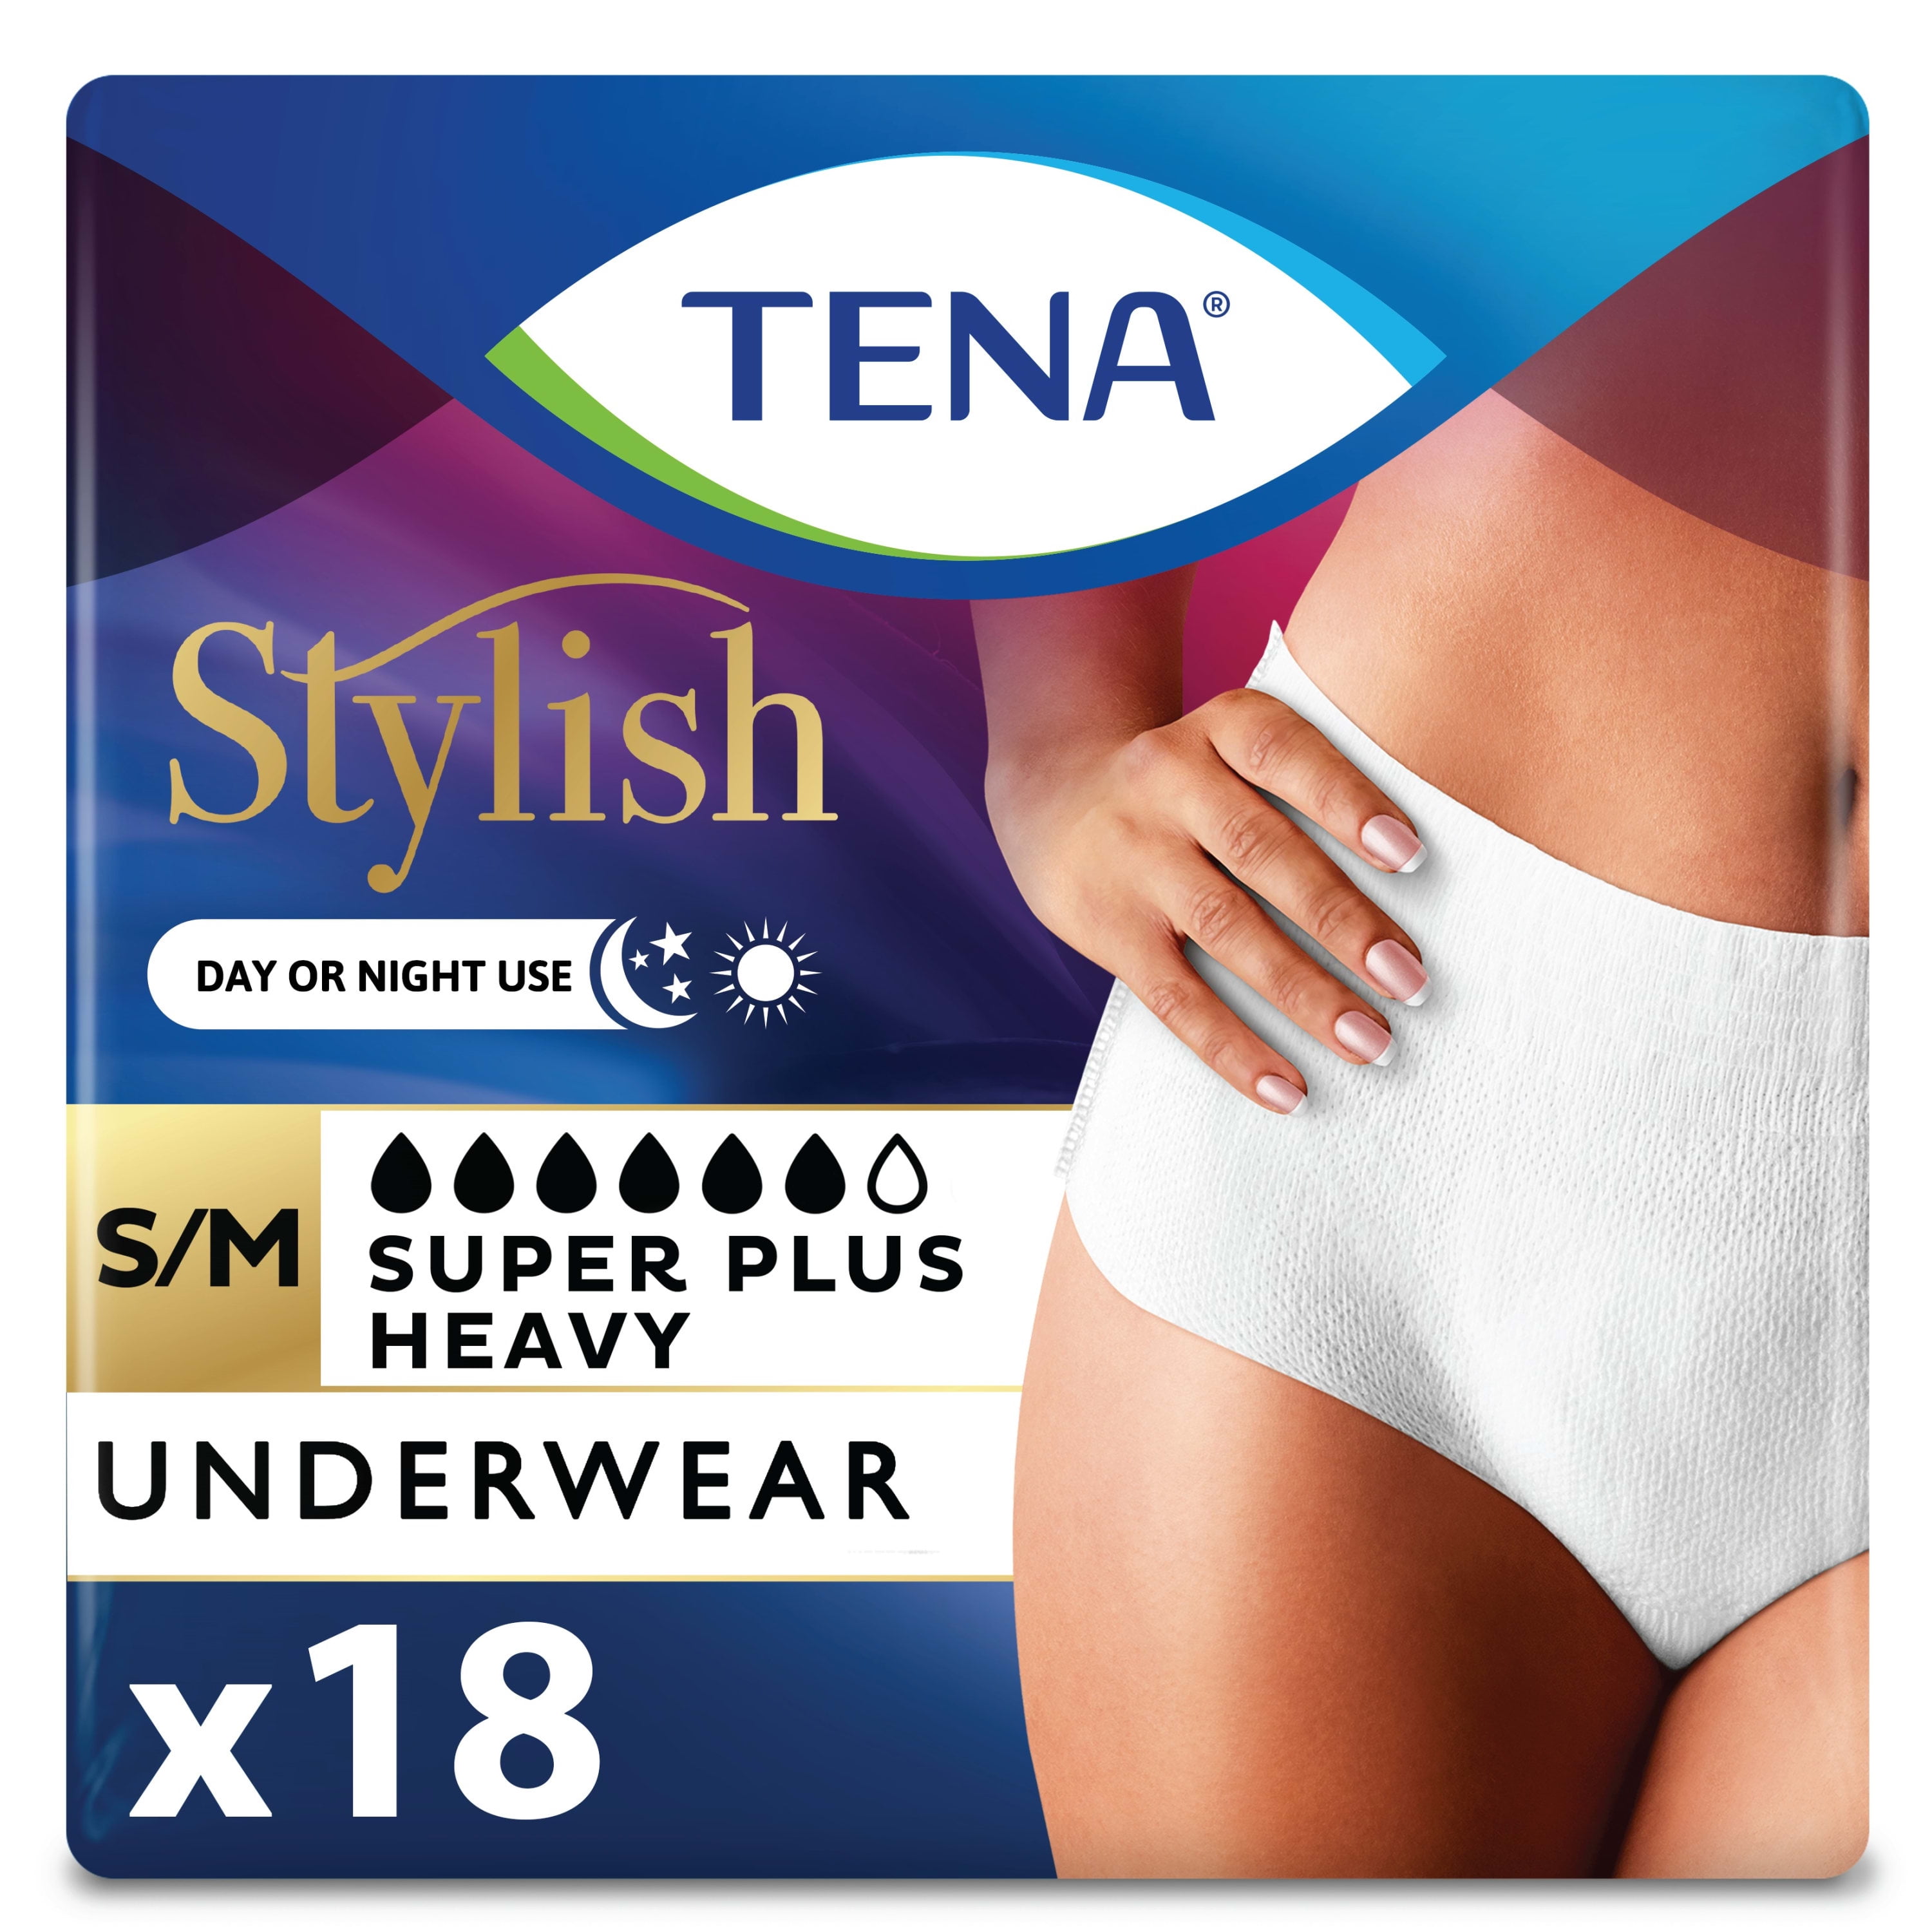 Adult Incontinence Products for Men & Women - TENA